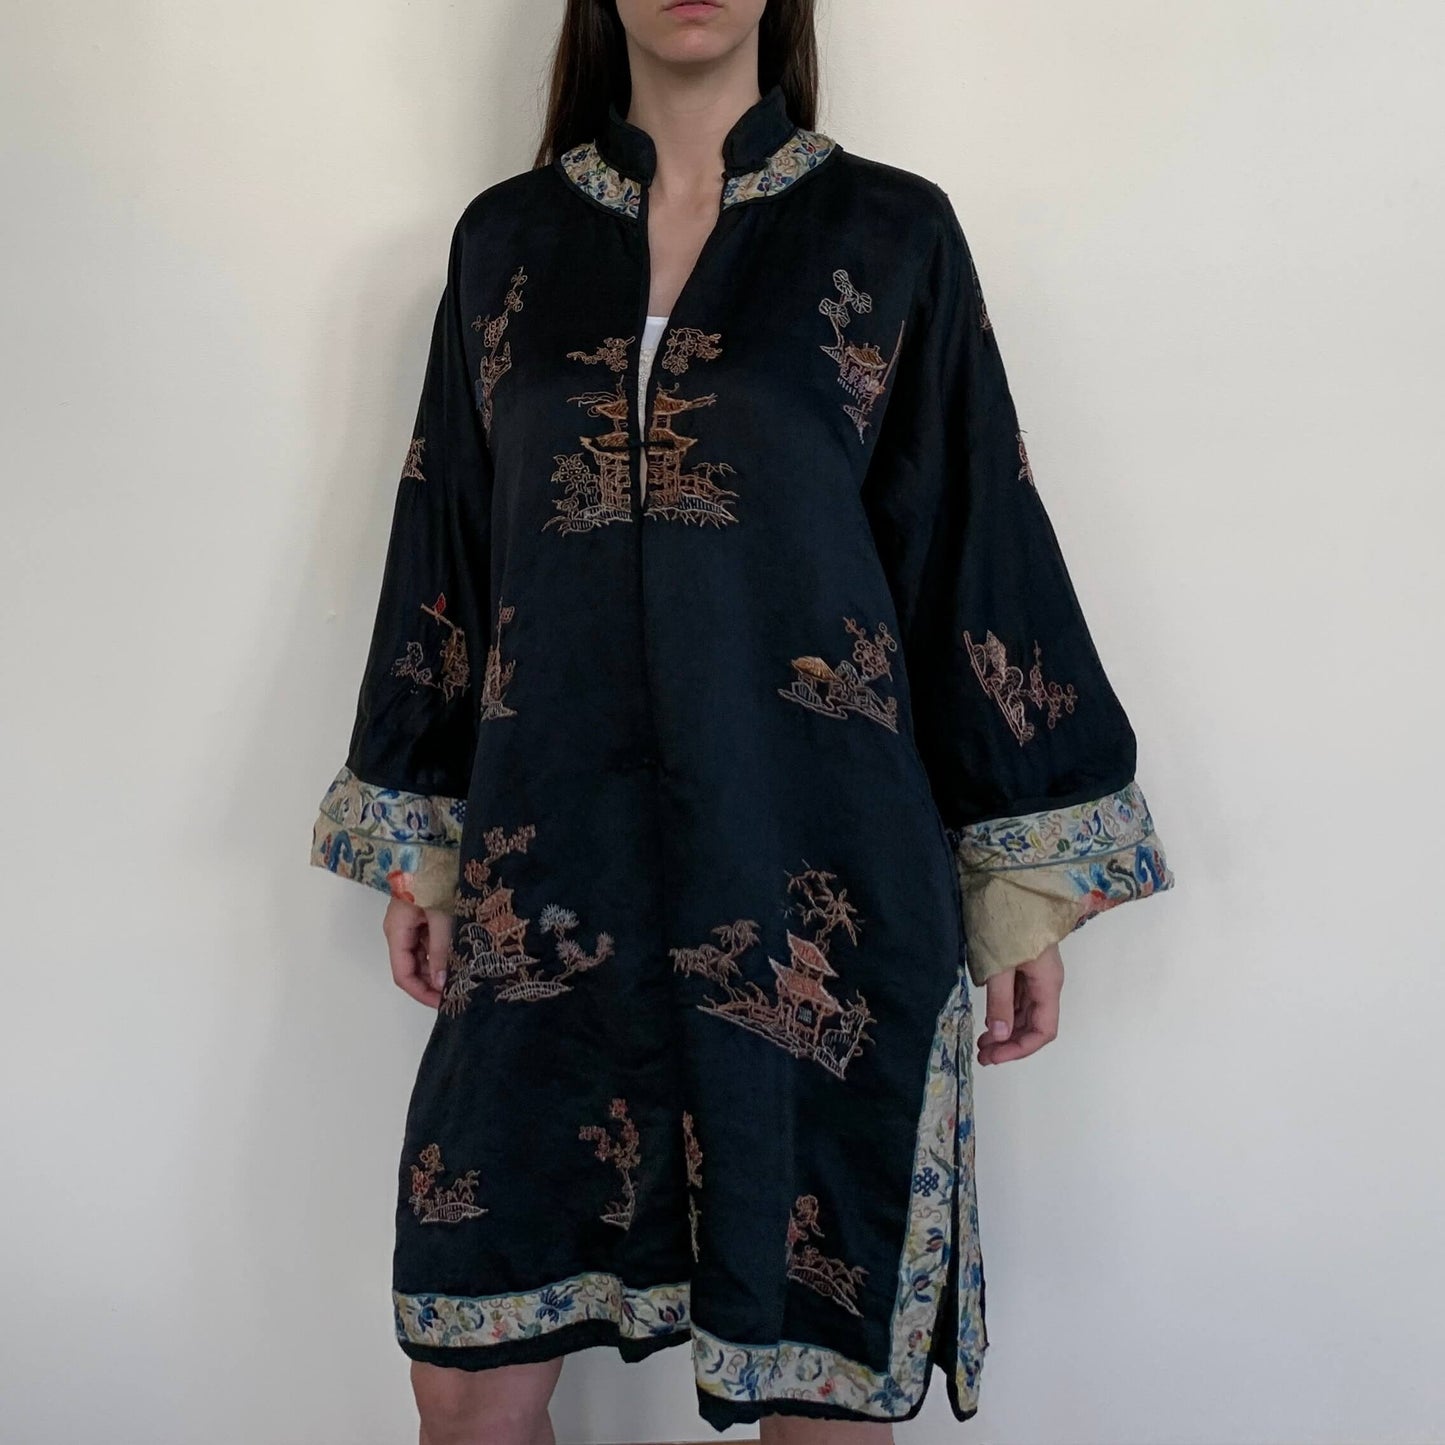 Antique Chinese Embroidered Silk Robe in black on a model